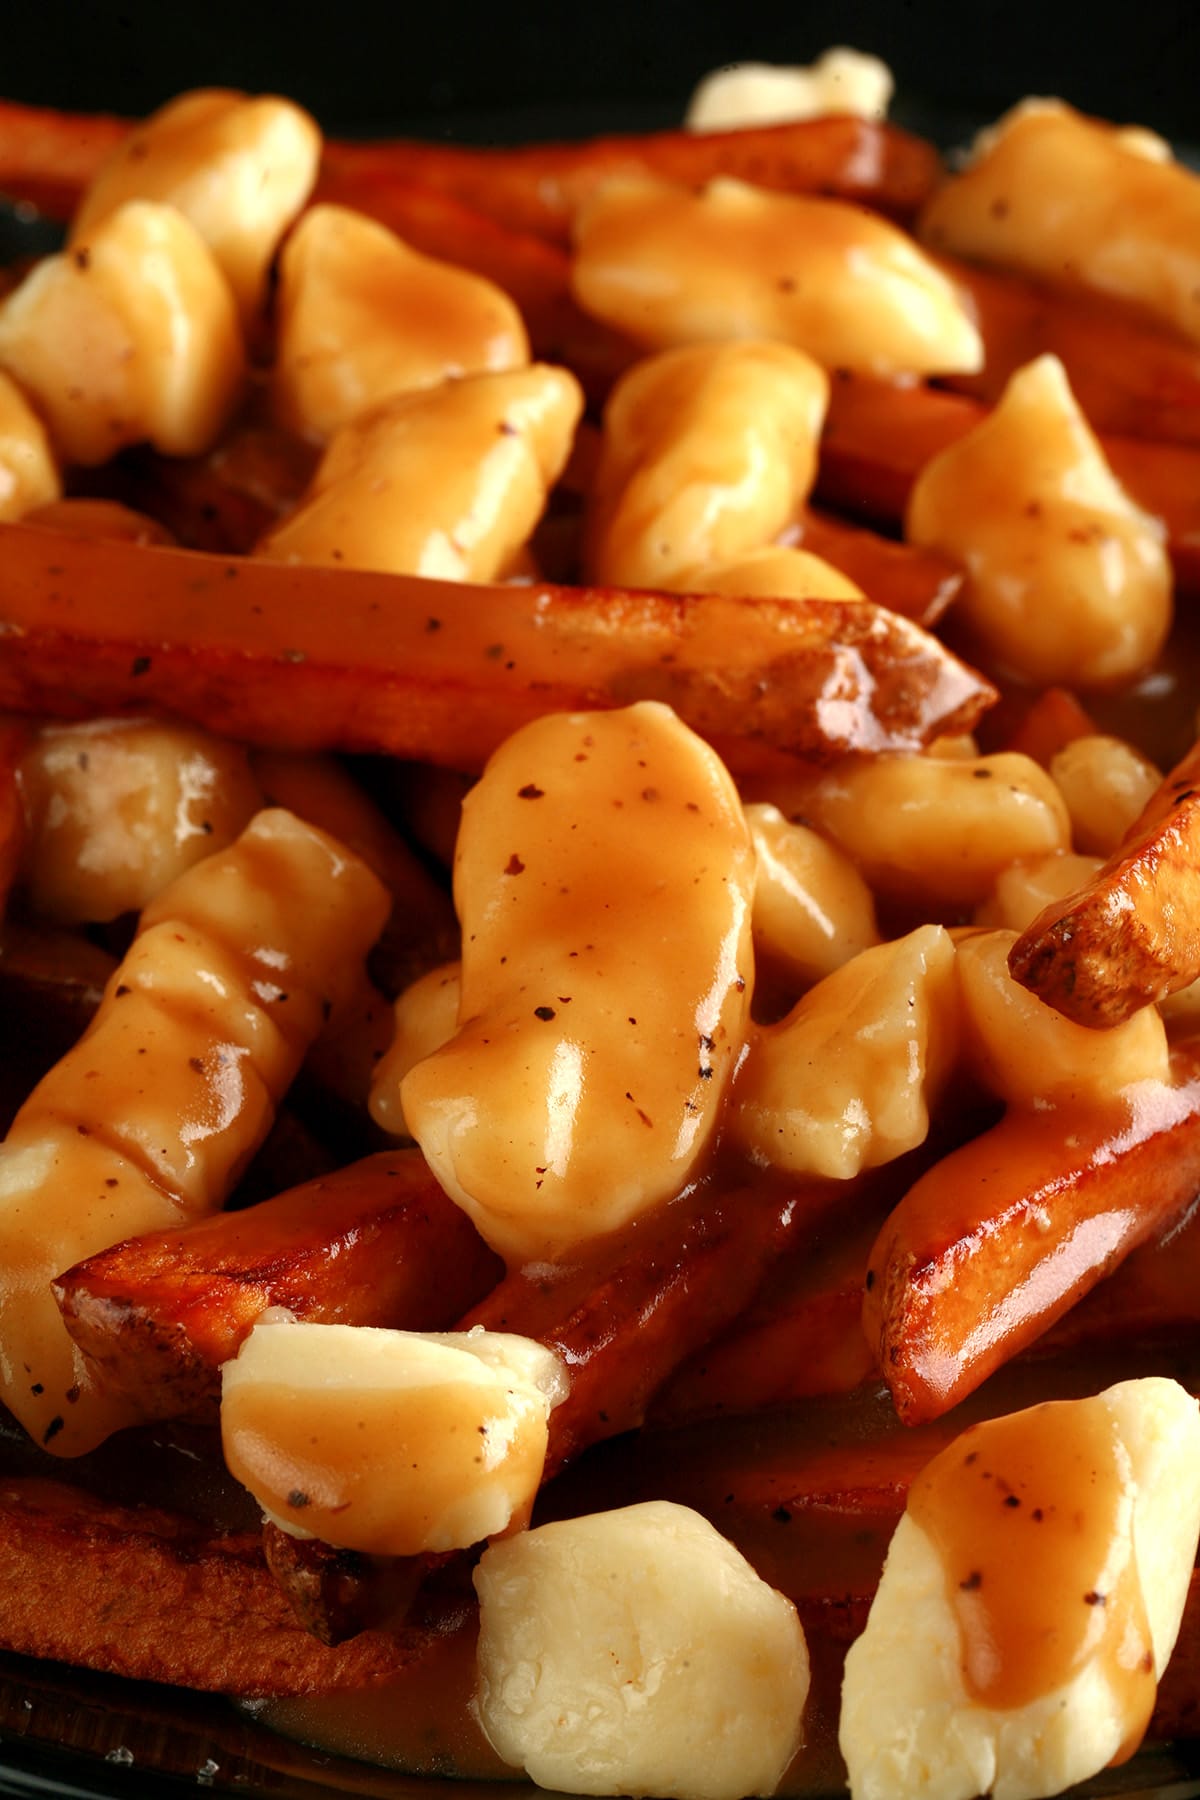 A close up photo of a plate of Canadian poutine.